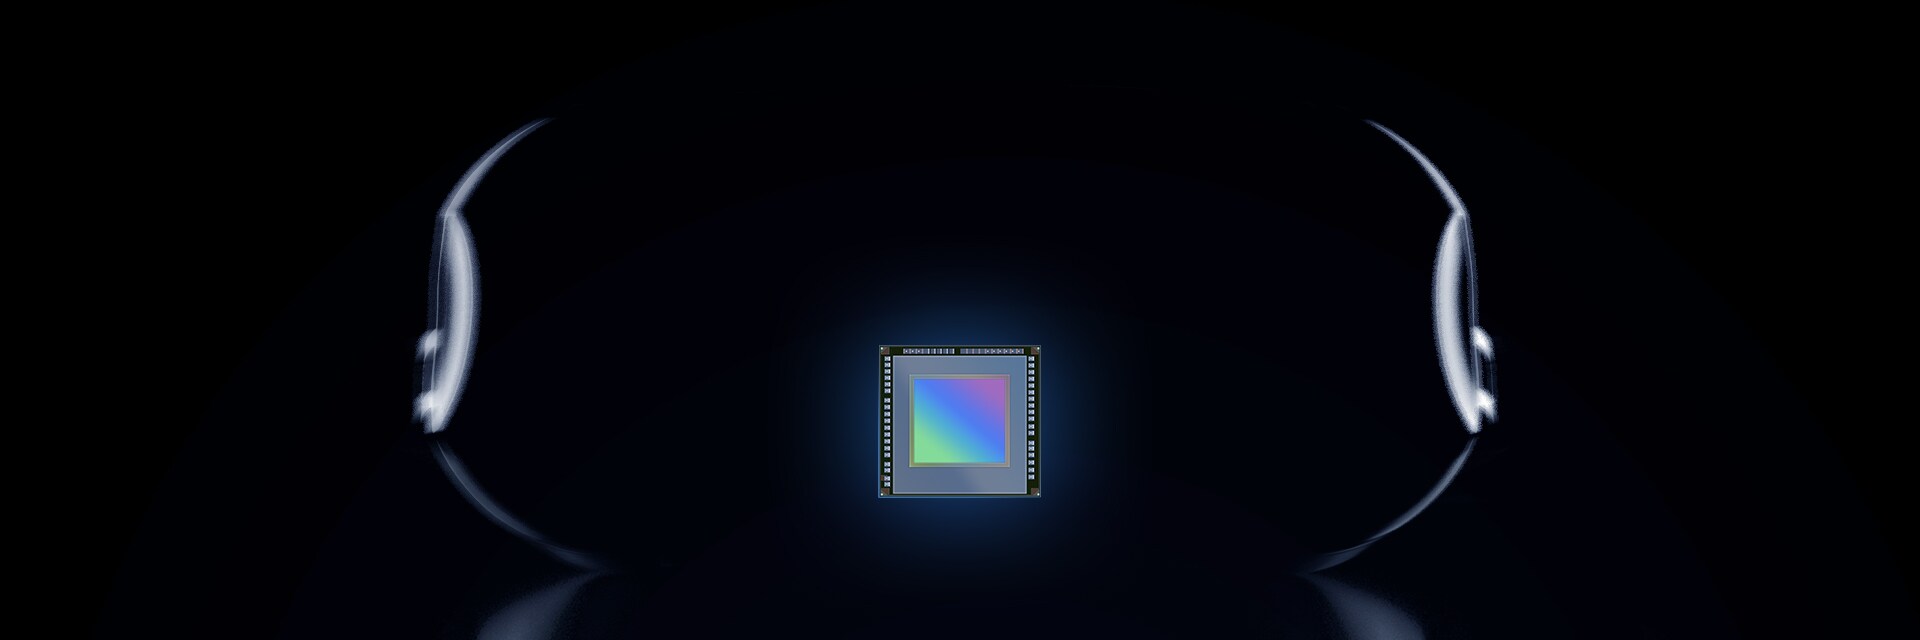 Samsung's Global Shutter image sensor provides images that reduces distortion in applications requiring speed and accuracy, such as XR devices.